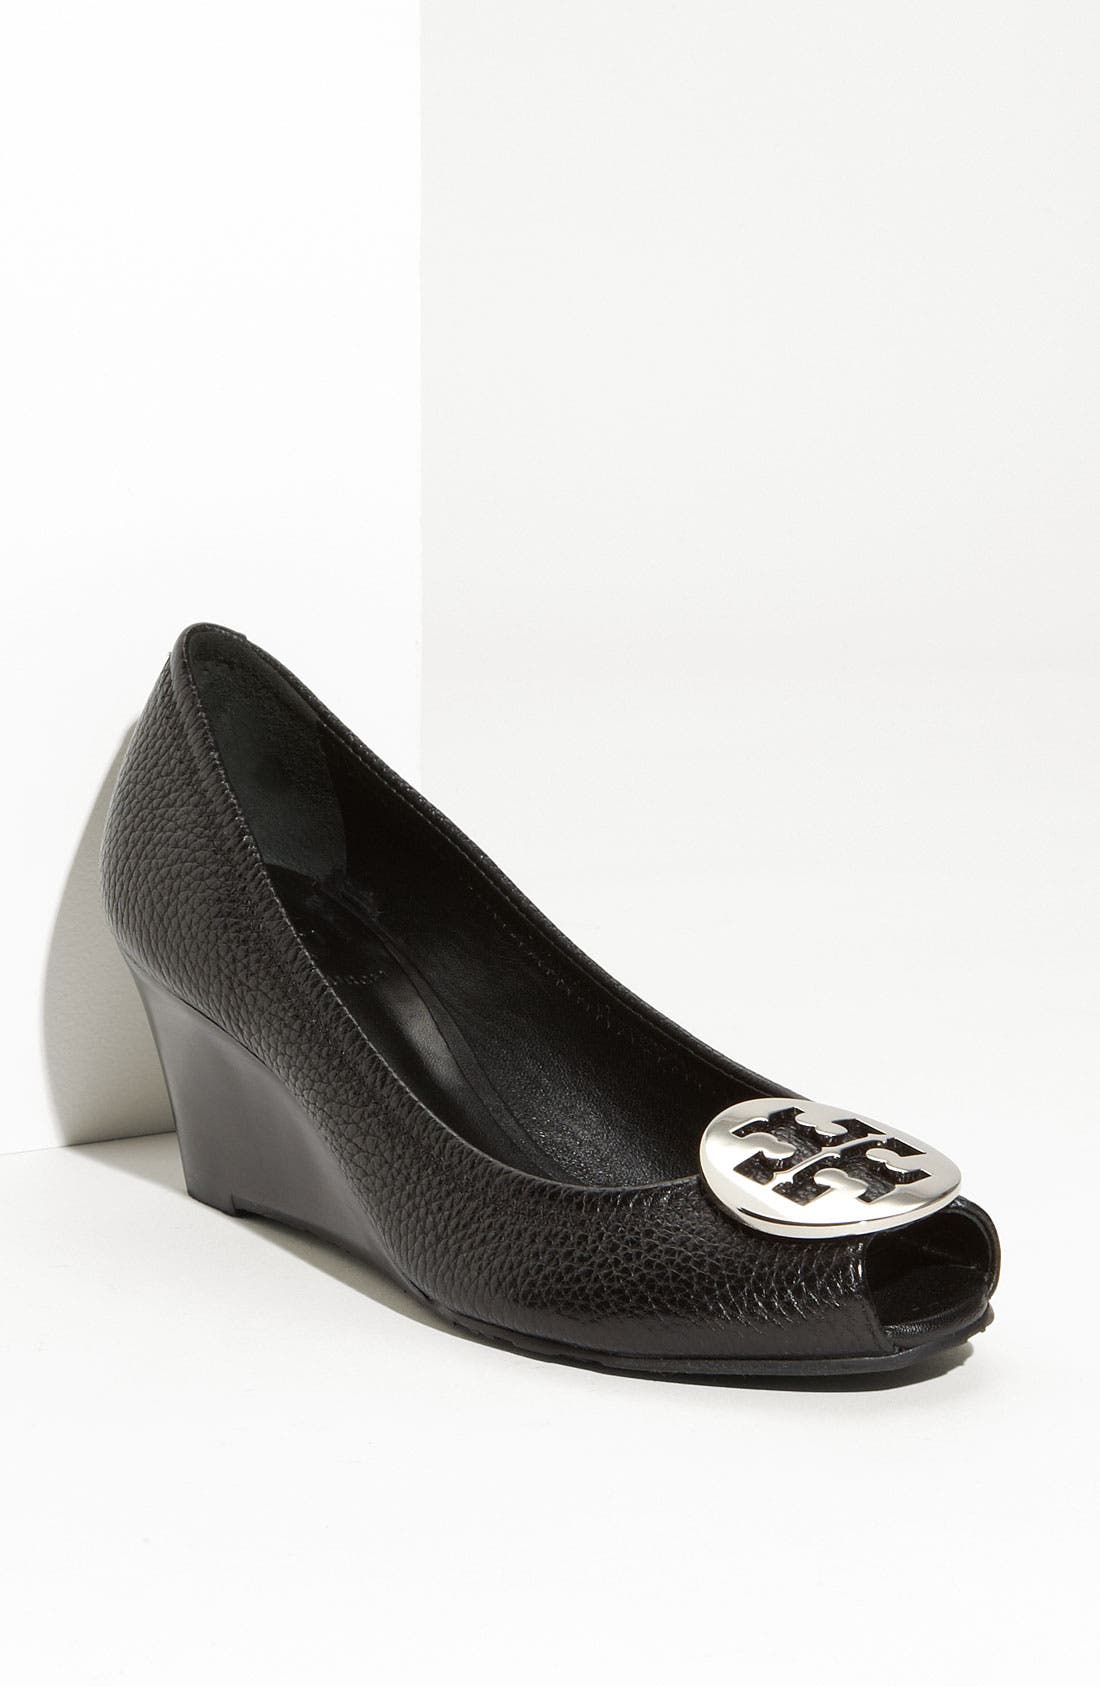 tory burch wedges shoes